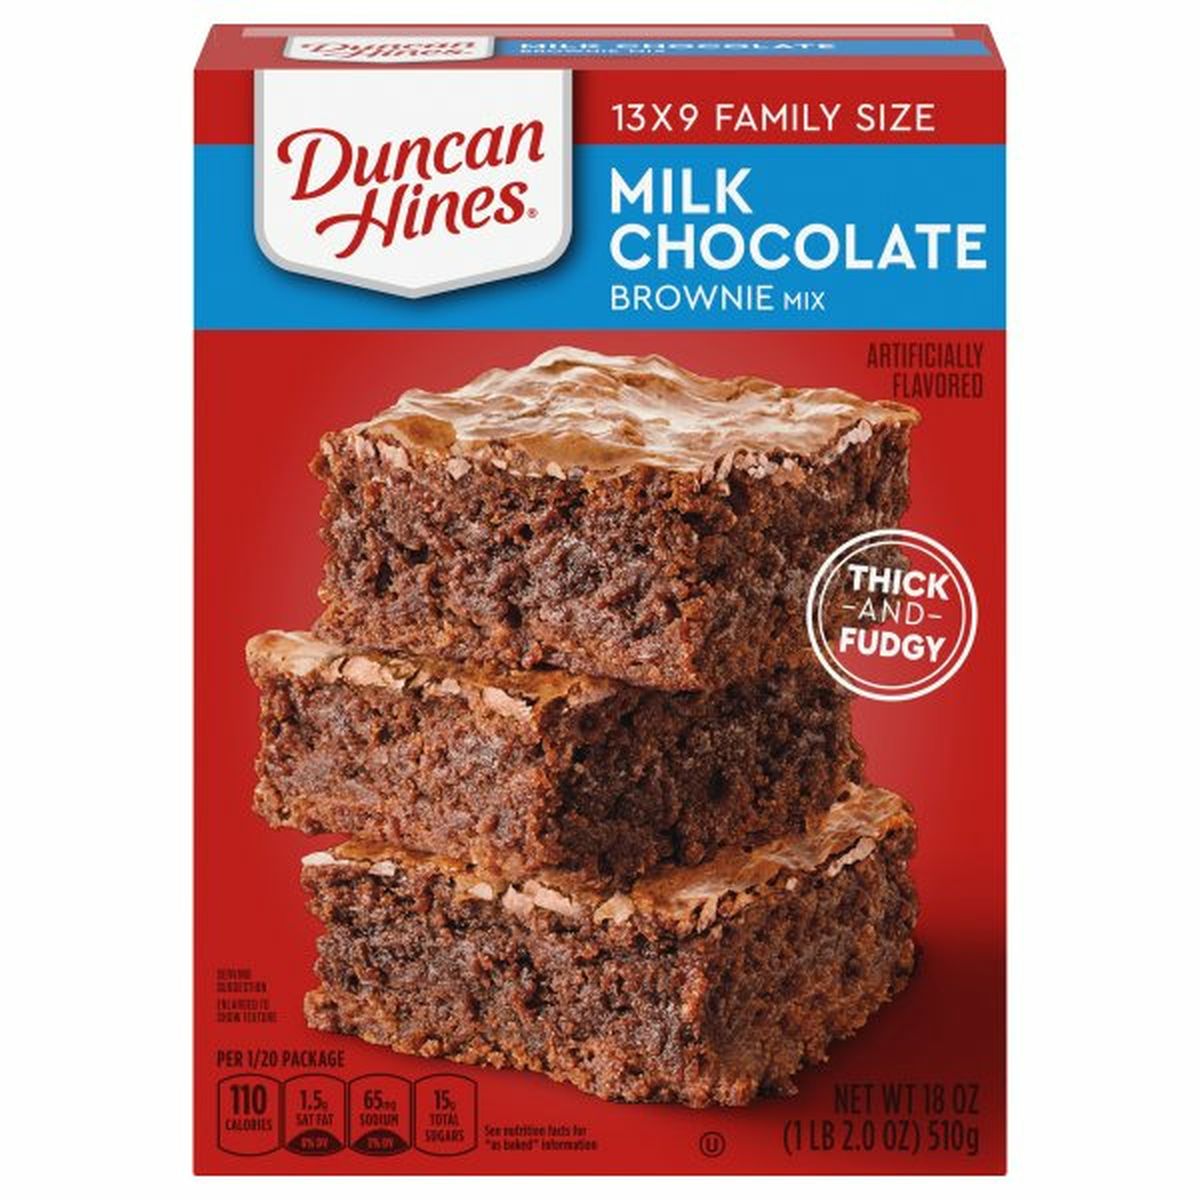 Calories in Duncan Hines Brownie Mix, Milk Chocolate, Family Size